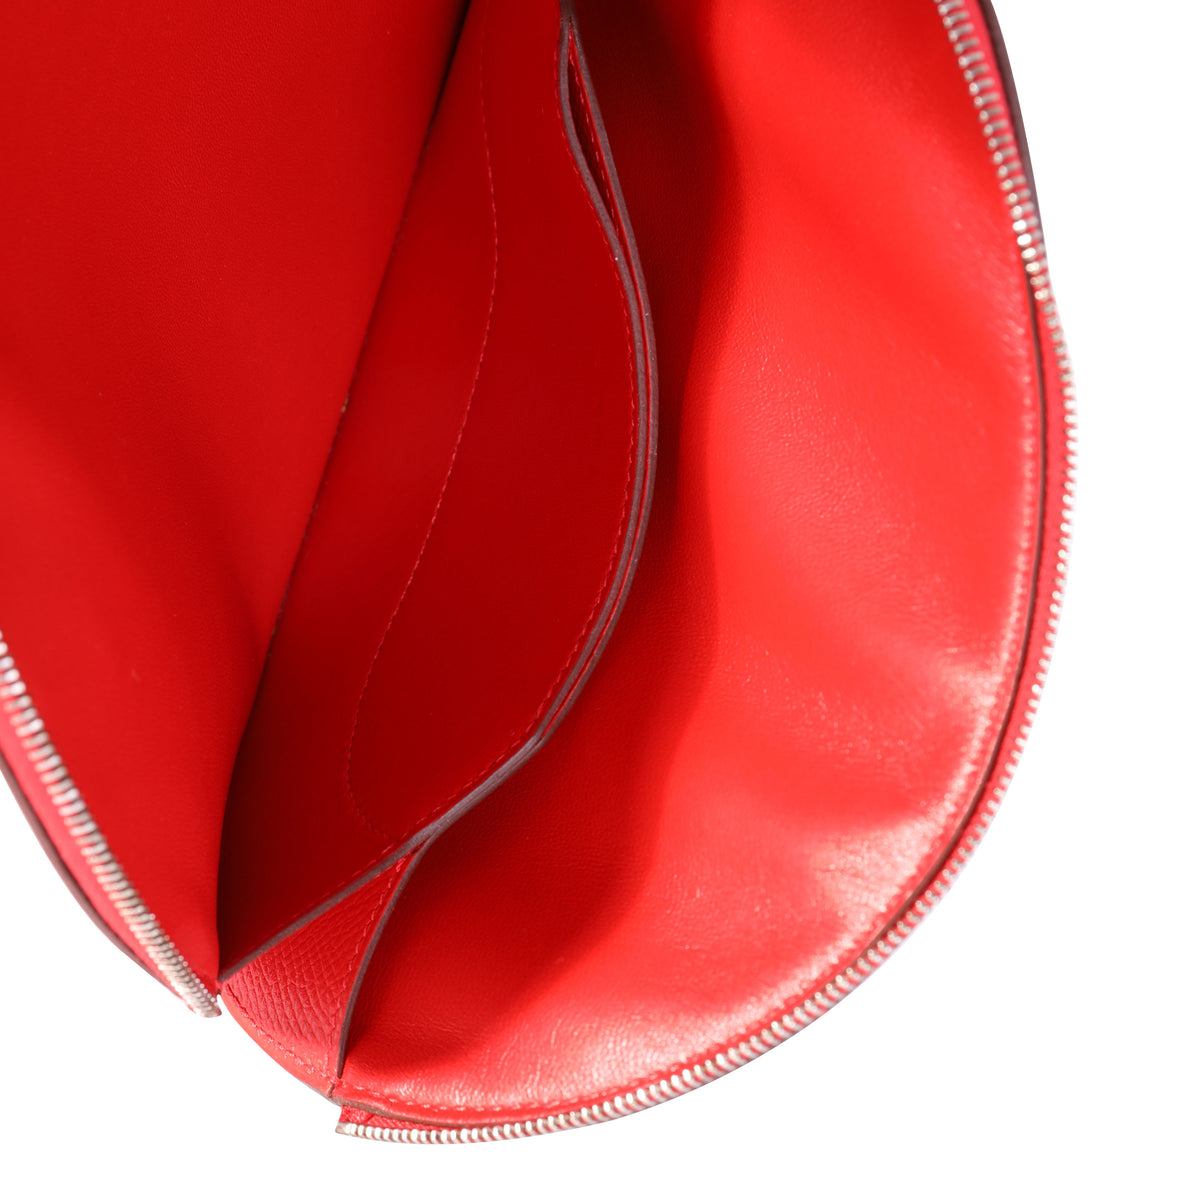 HERMES Epsom In-The-Loop-To-Go Pouch Multicolore Rouge De Coeur